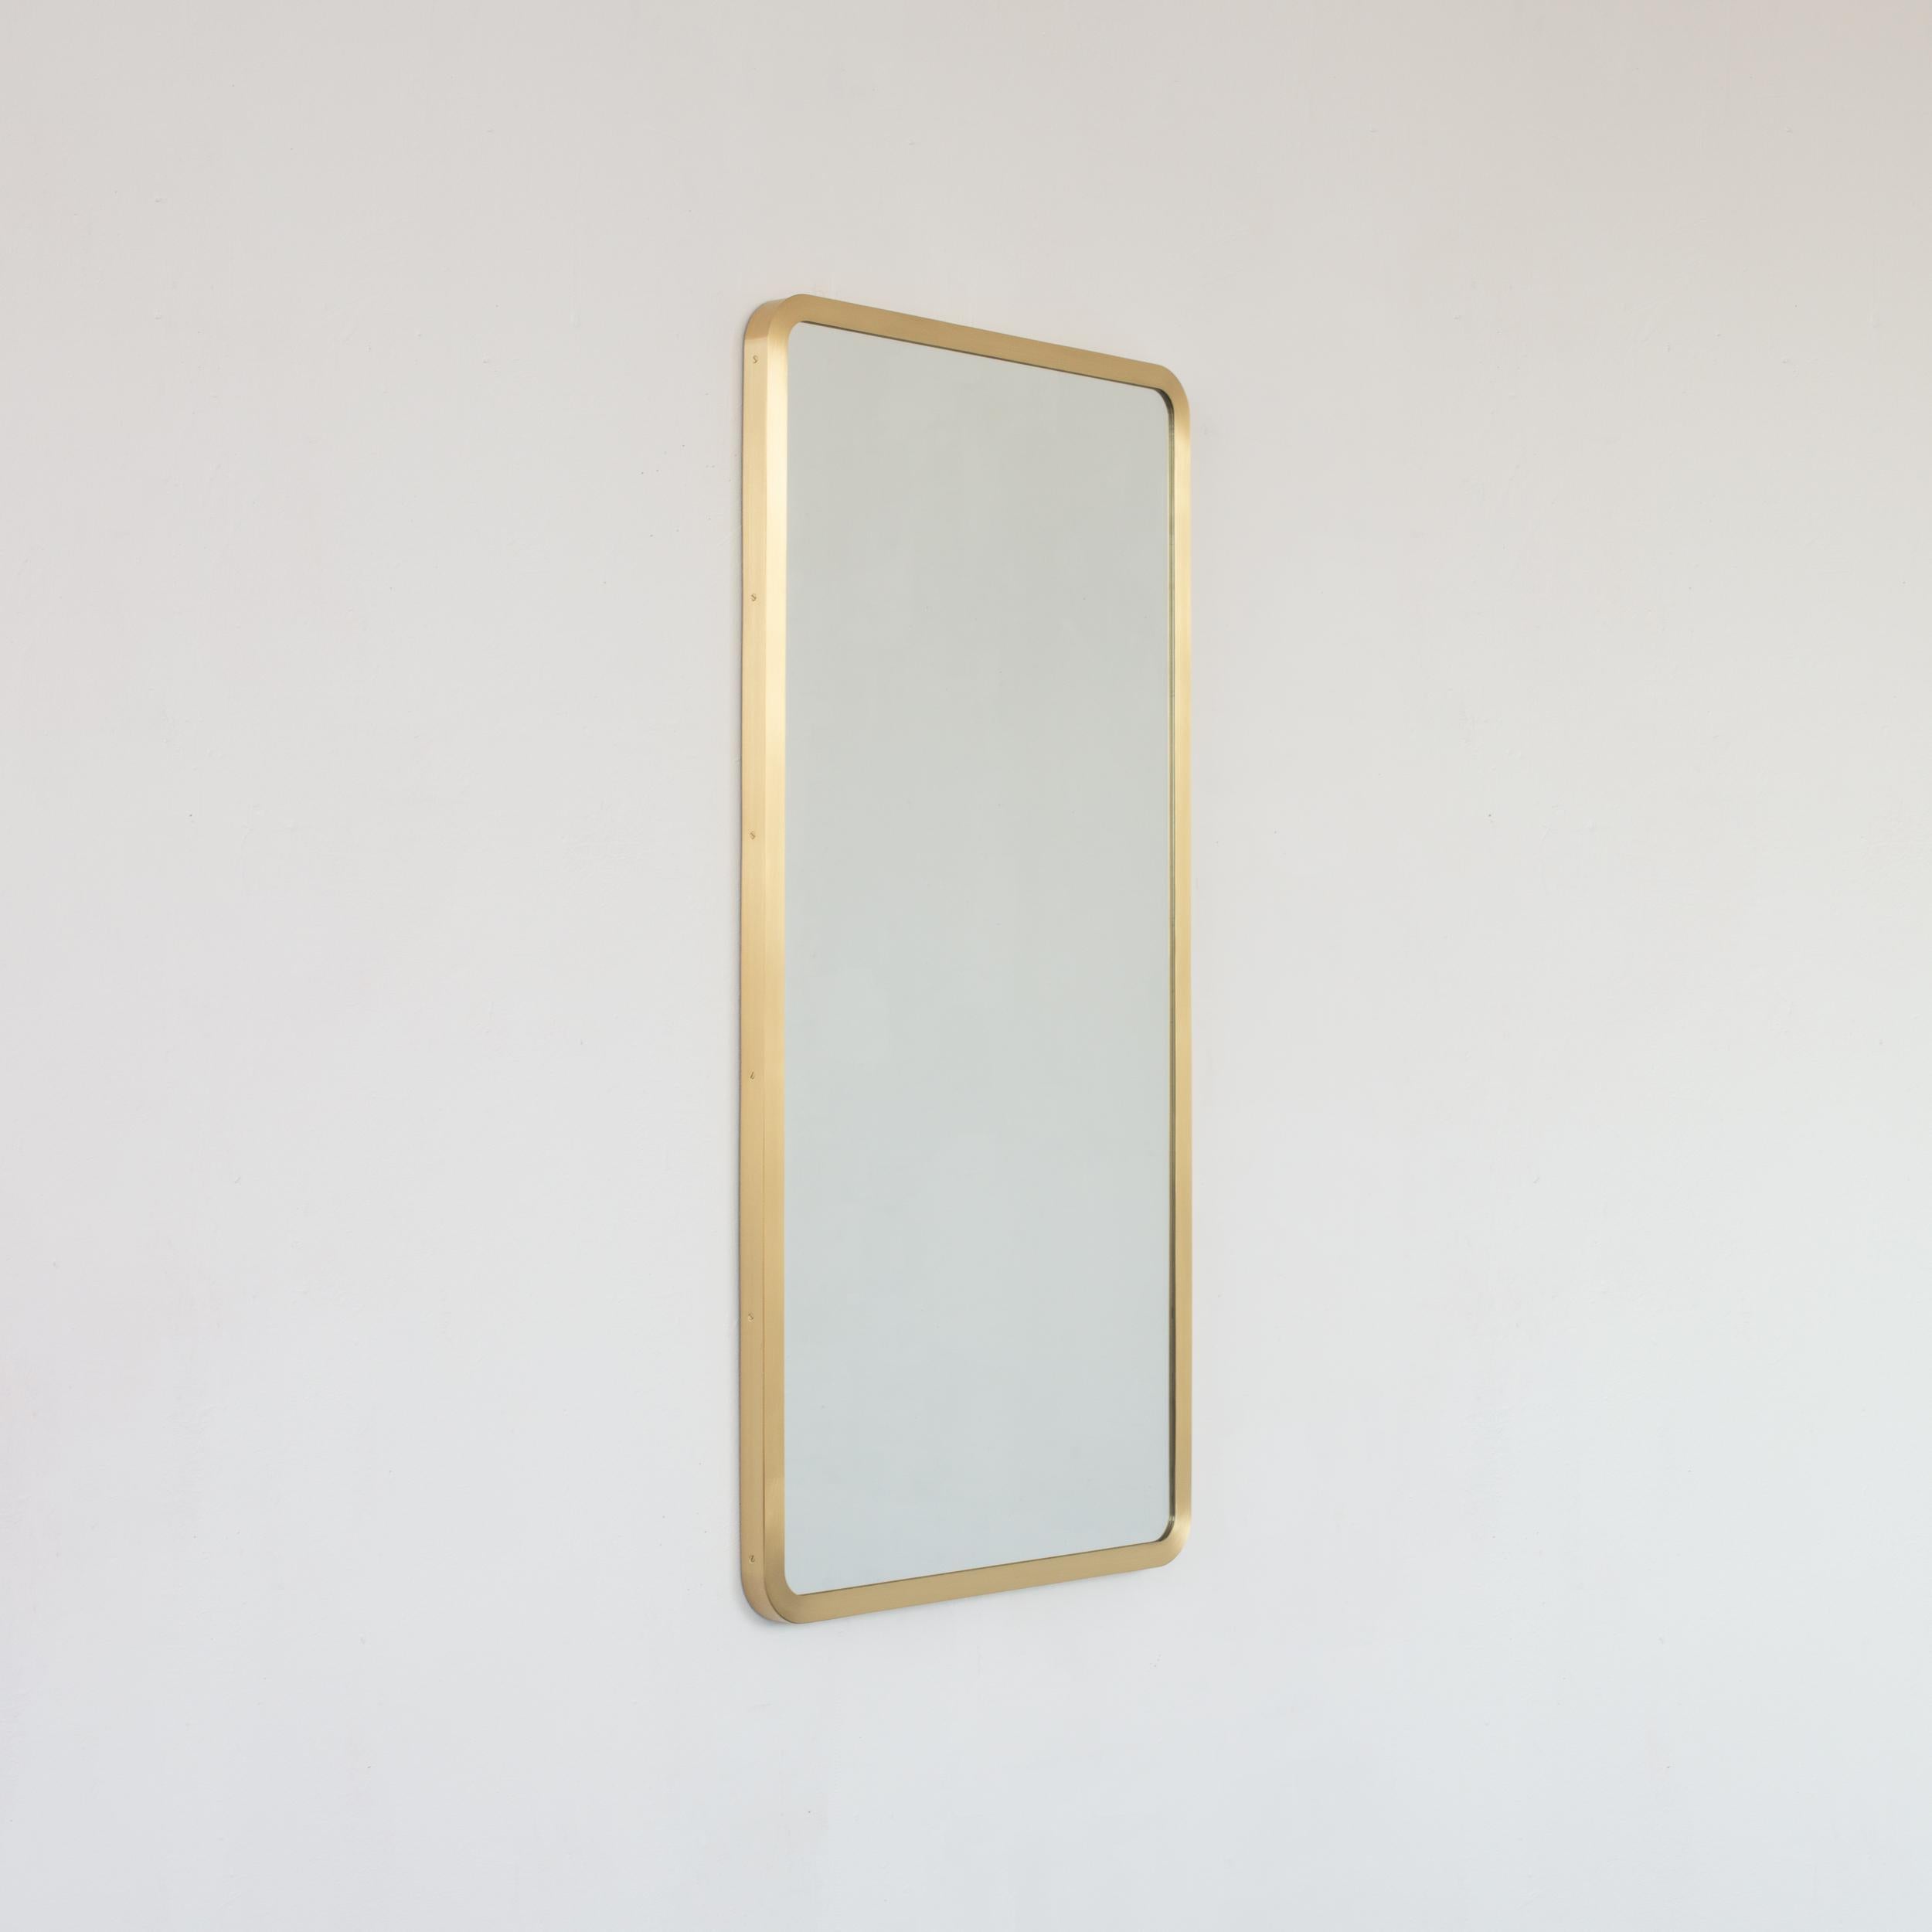 Modern rectangular mirror with an elegant solid brushed brass frame. Part of the charming Quadris collection, designed and handcrafted in London, UK. 

Supplied fitted with a specialist z-bar for an easy installation. A split batten hanging system